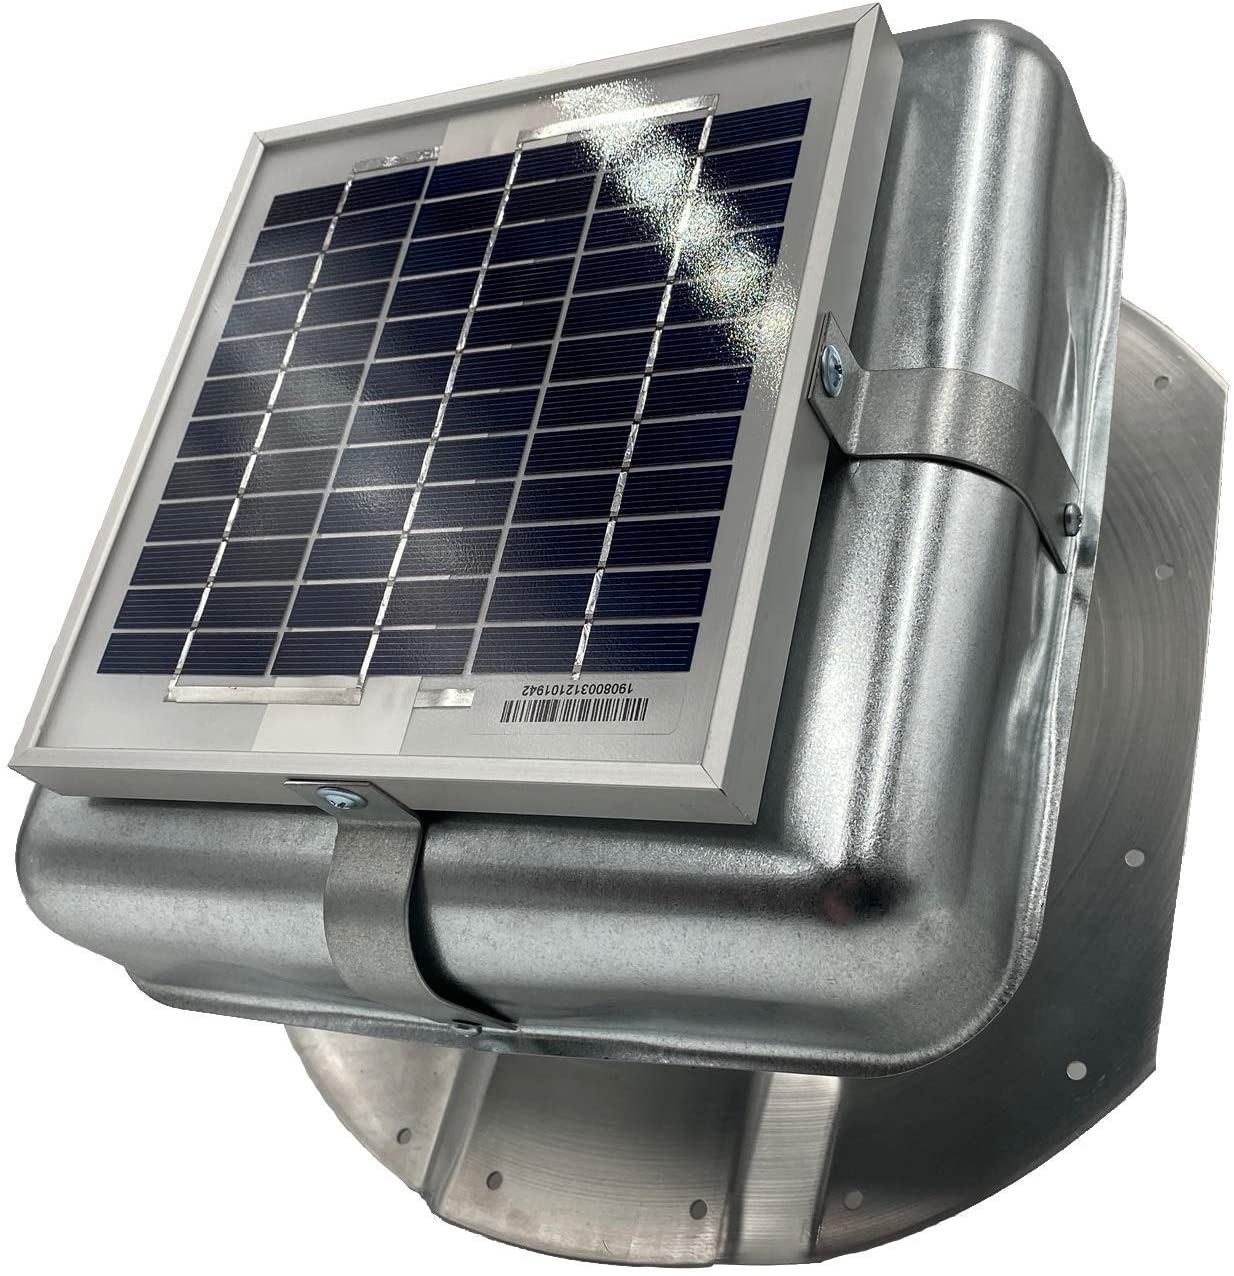 https://usacontainers.co/wp-content/uploads/2021/01/Shipping-Container-Industrial-Solar-Vent.jpg